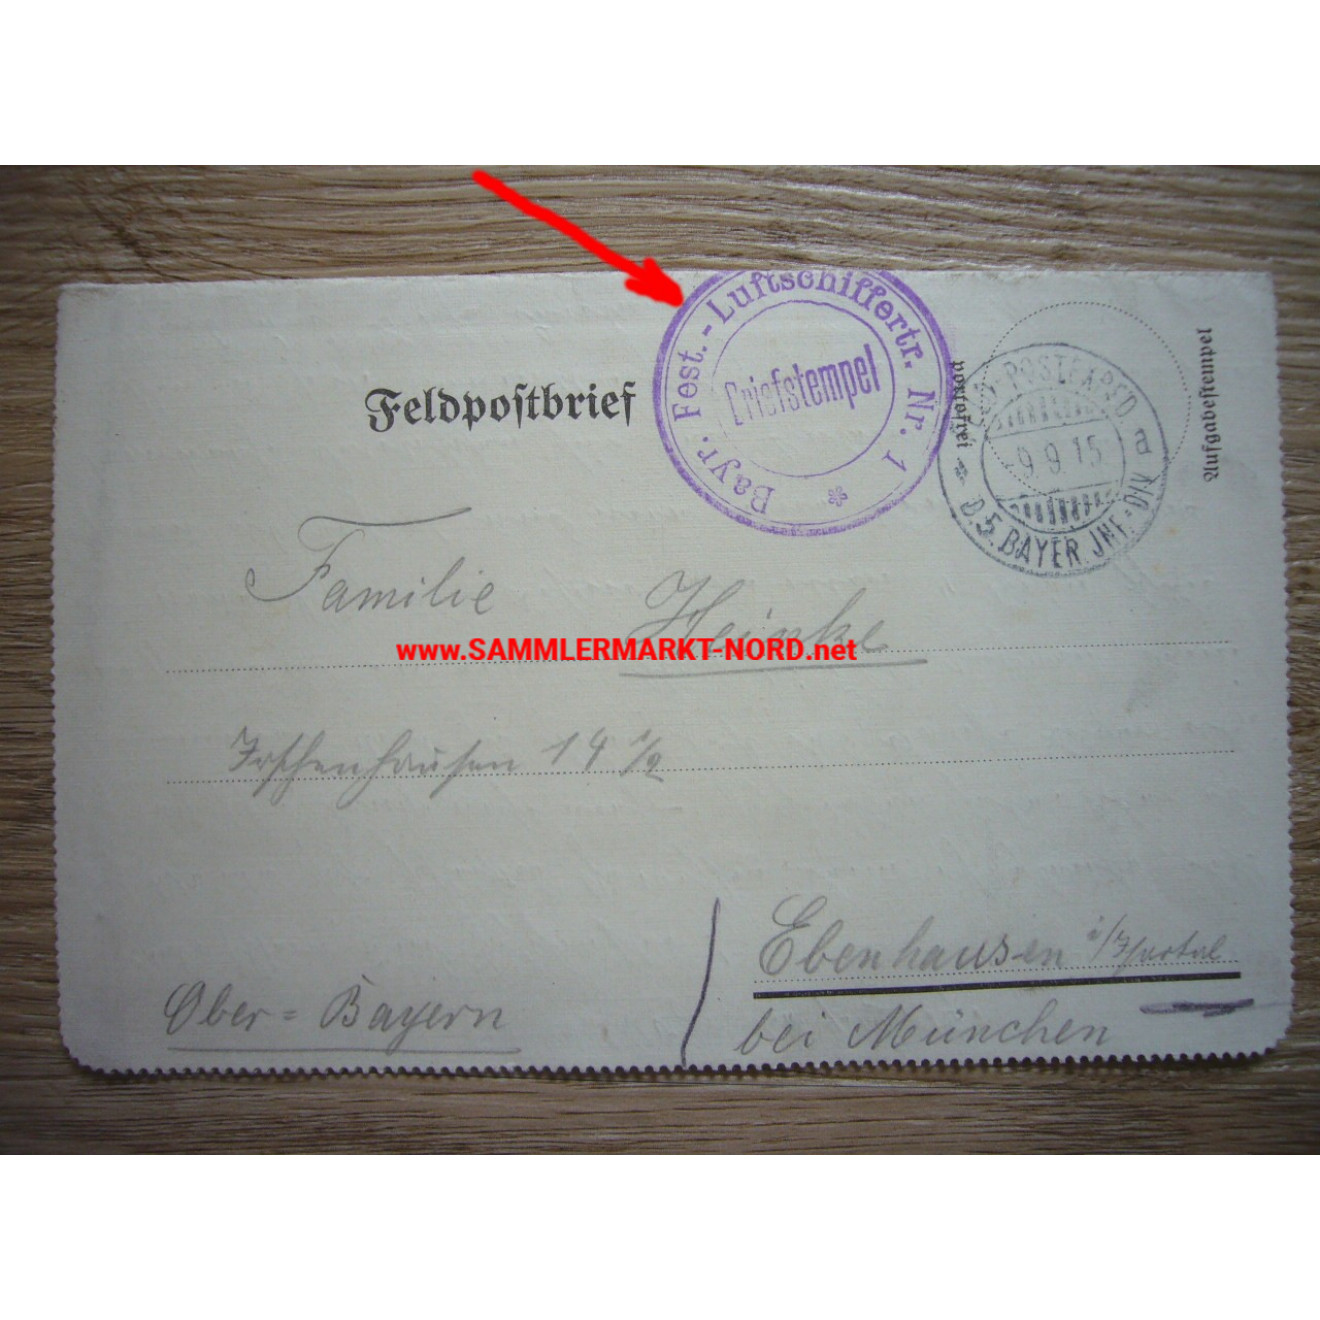 Bavarian fortress airship troop no. 1 - Field post cover 1915